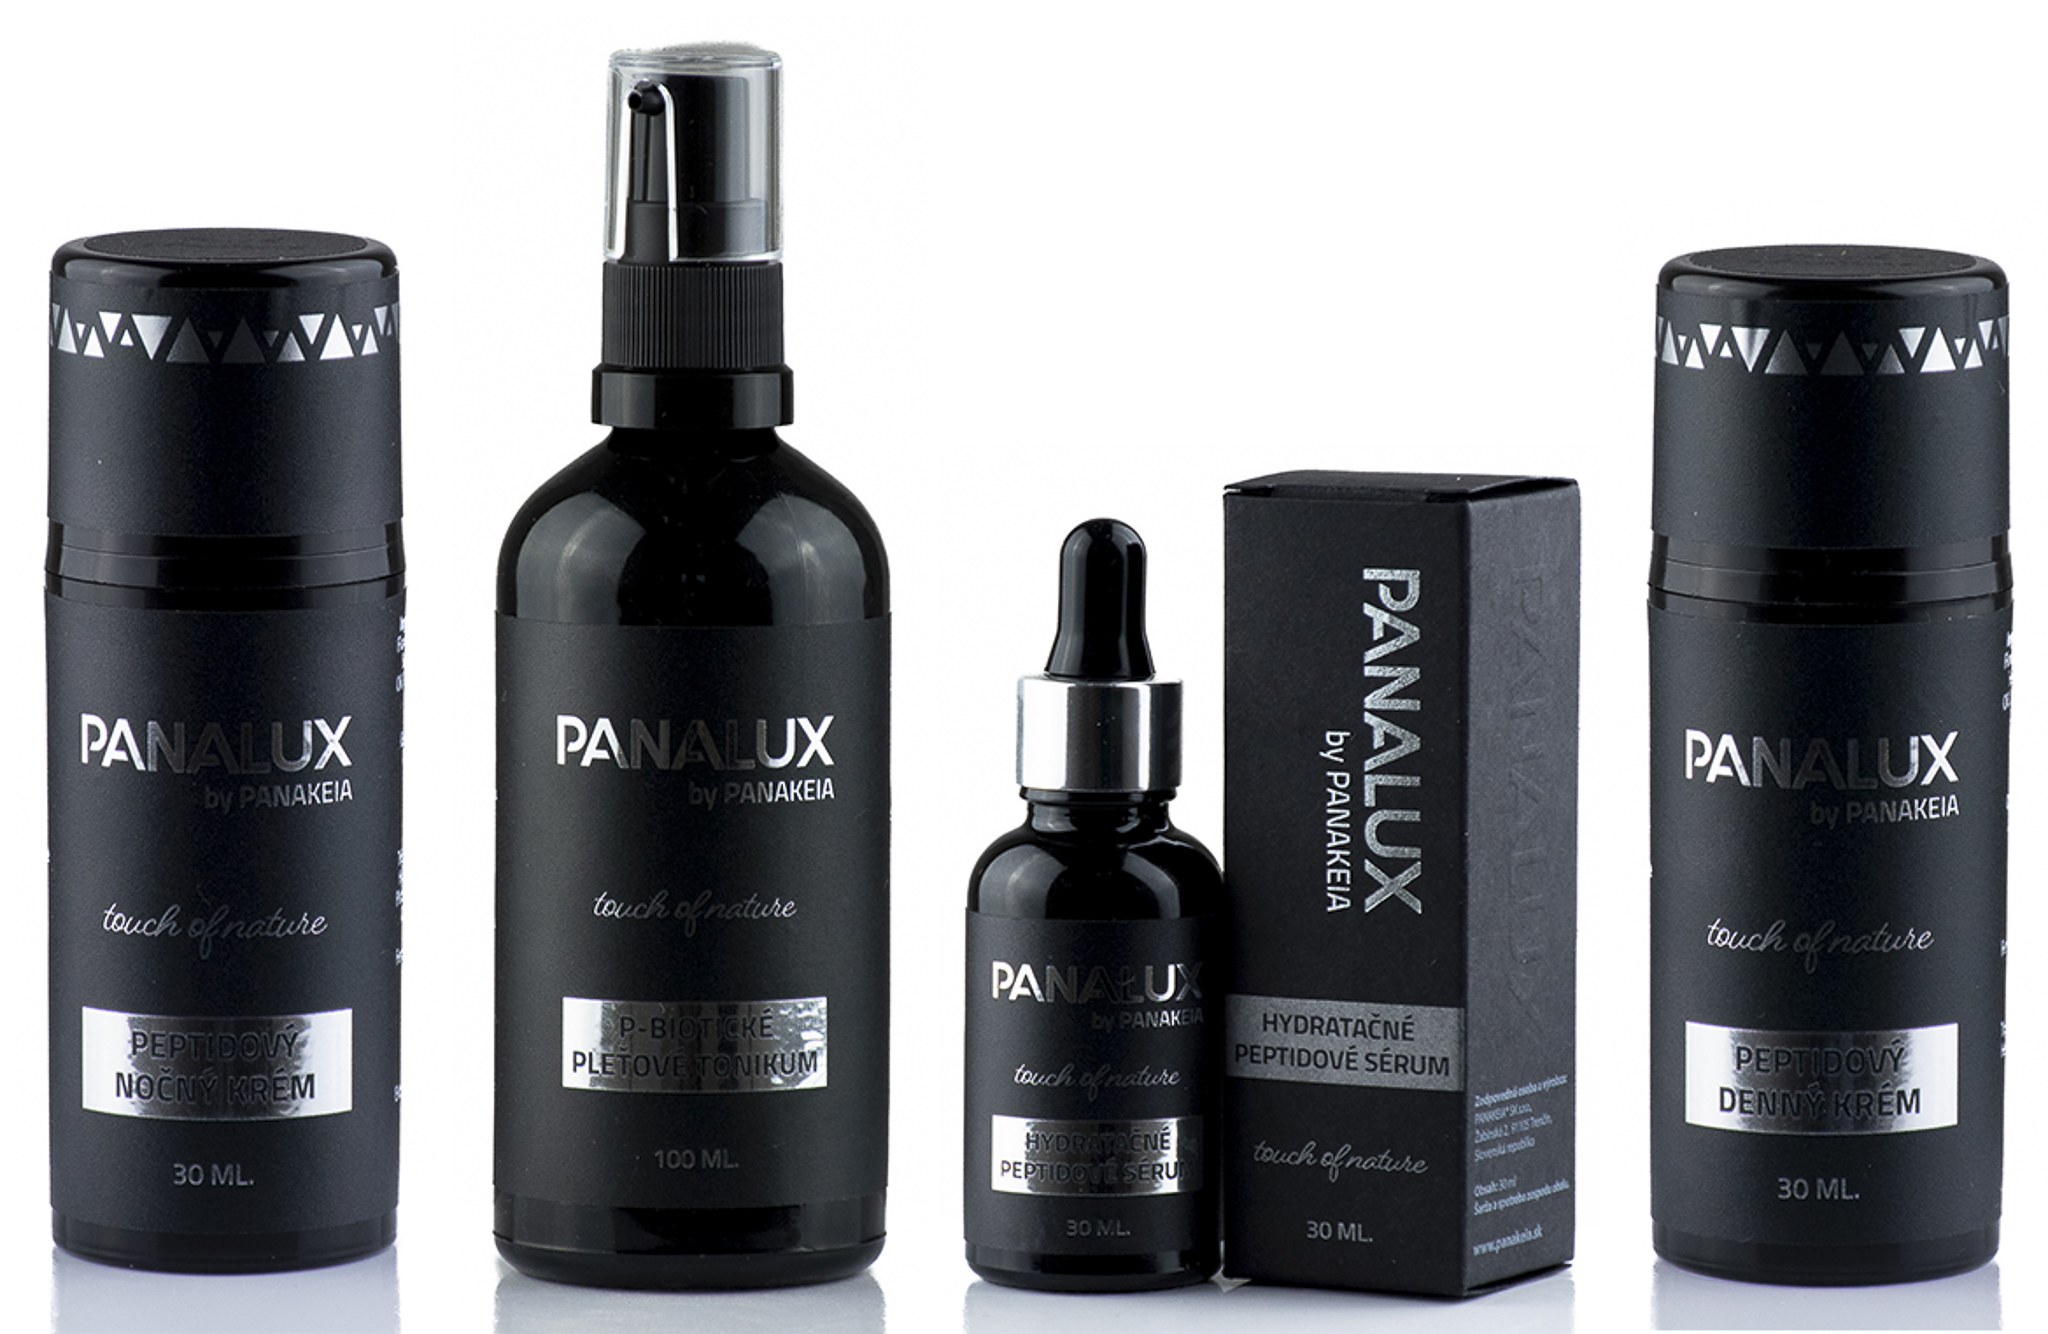 PANALUX by PANAKEIA Peptidový set komplet 3x30ml 1x100ml